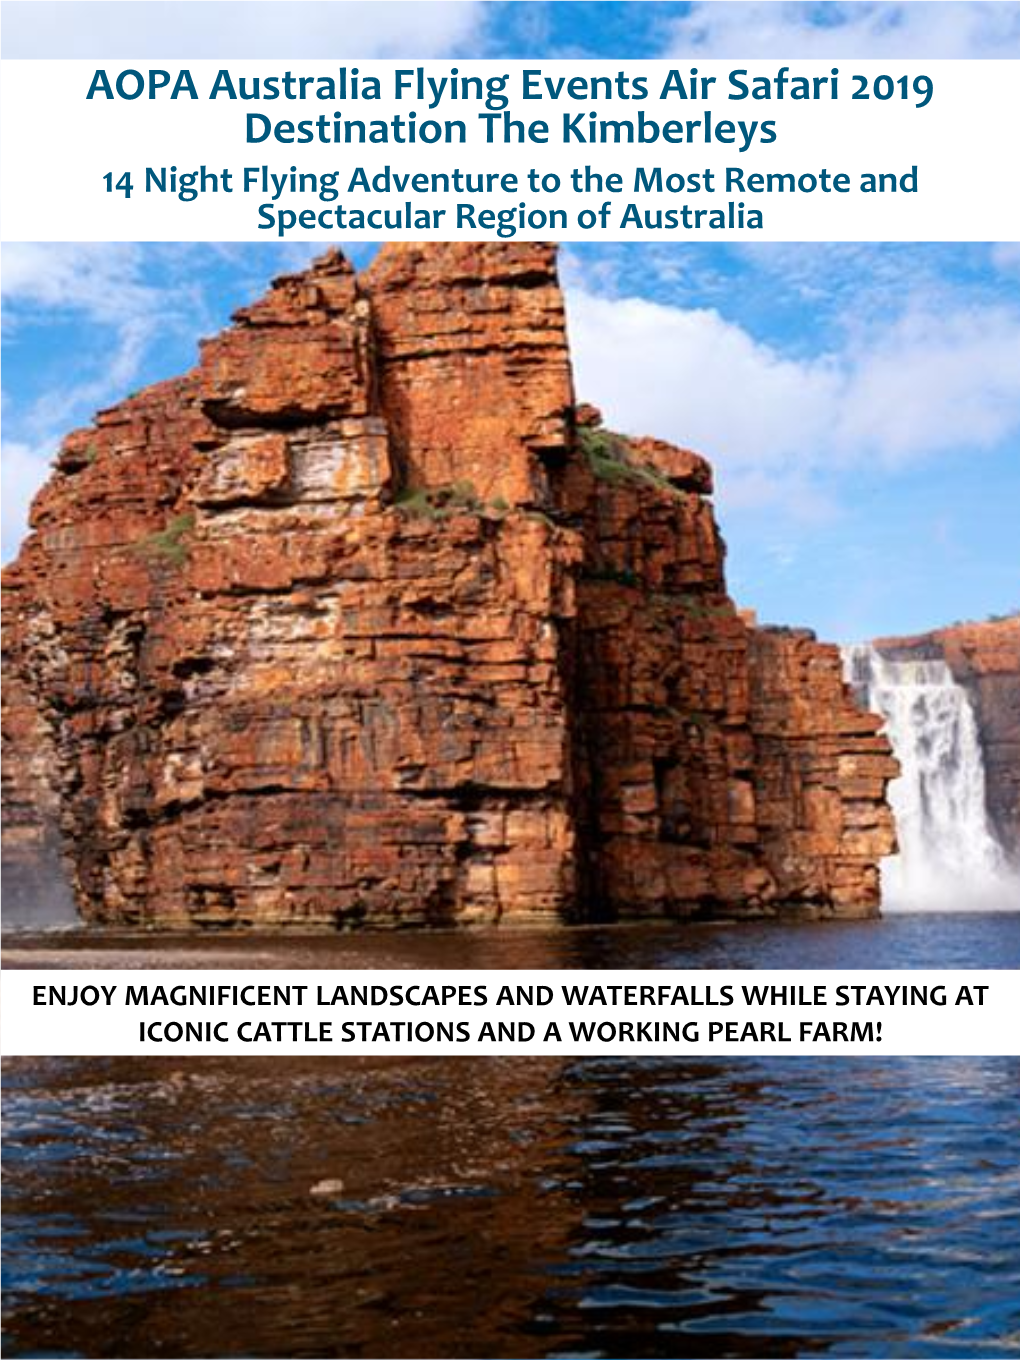 AOPA Australia Flying Events Air Safari 2019 Destination the Kimberleys 14 Night Flying Adventure to the Most Remote and Spectacular Region of Australia